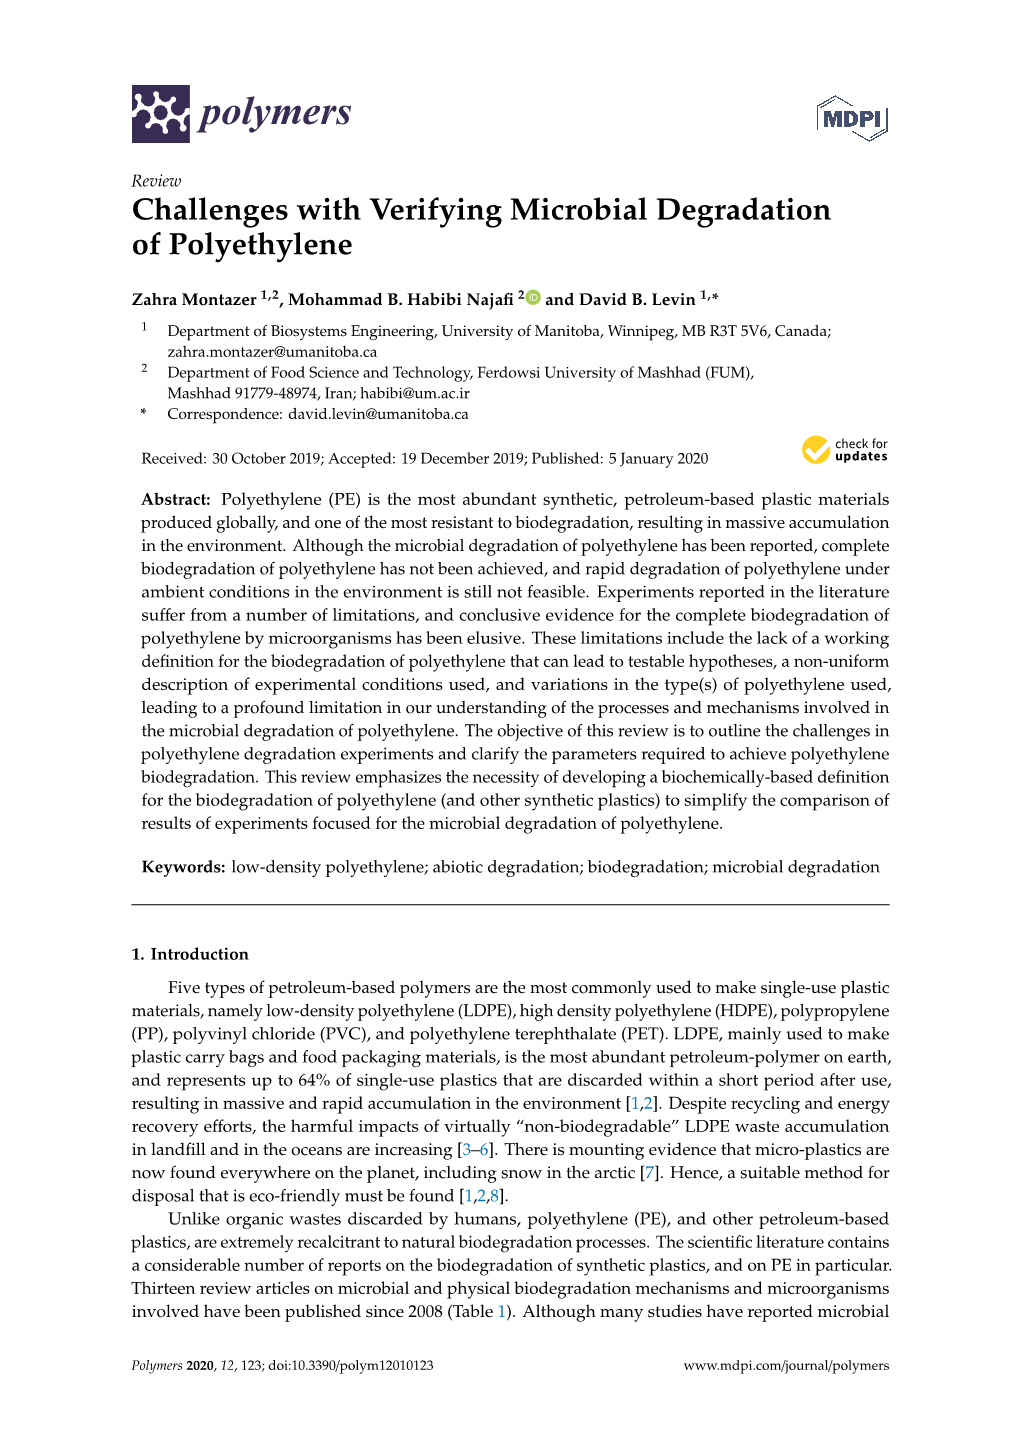 Challenges with Verifying Microbial Degradation of Polyethylene